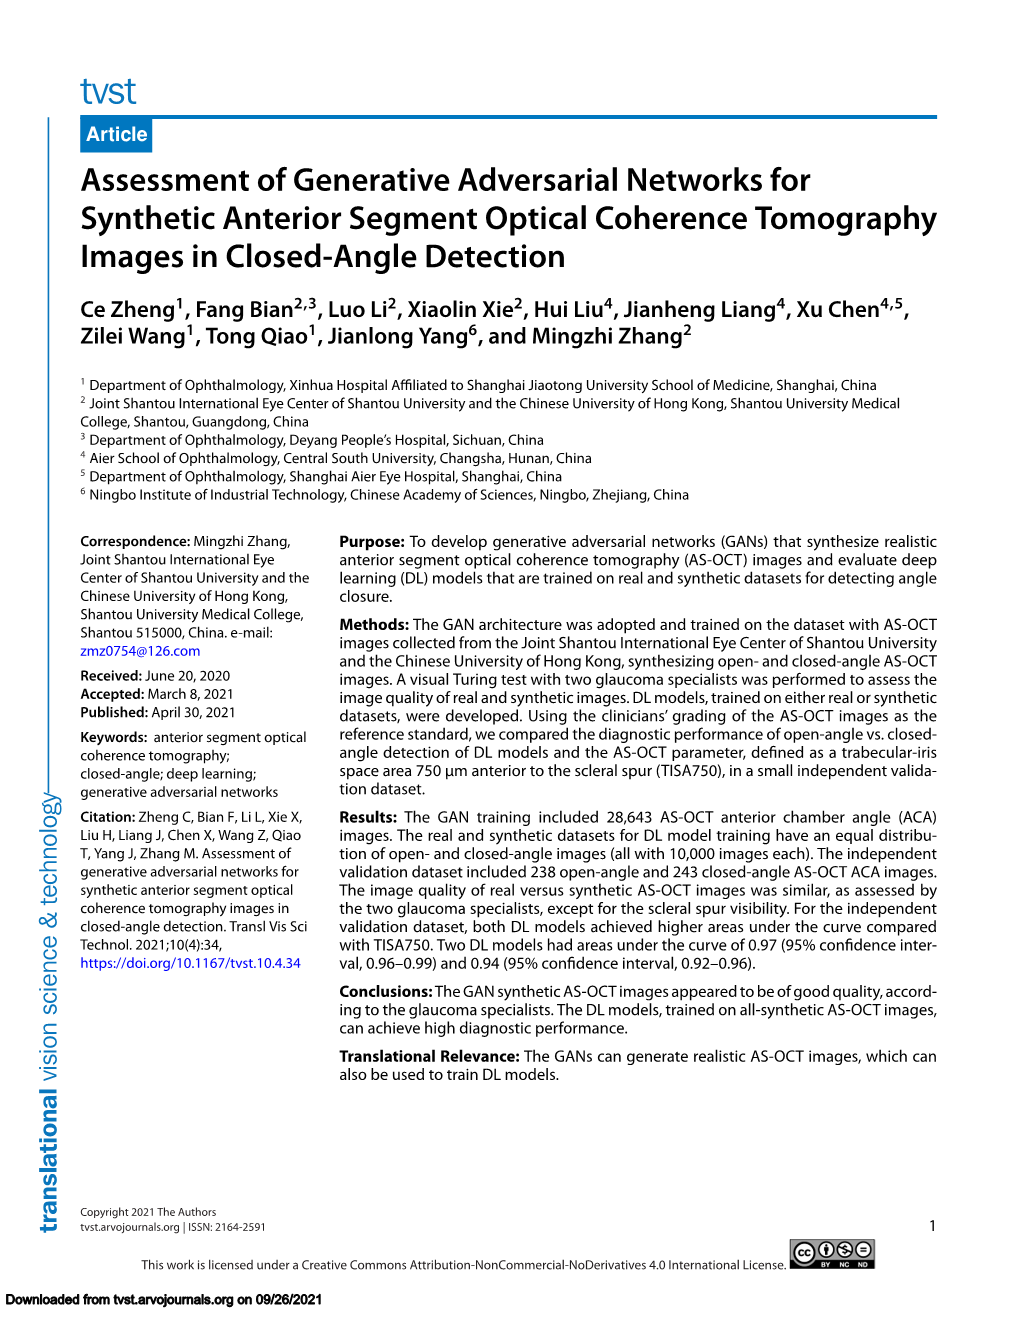 Assessment of Generative Adversarial Networks for Synthetic Anterior Segment Optical Coherence Tomography Images in Closed-Angle Detection